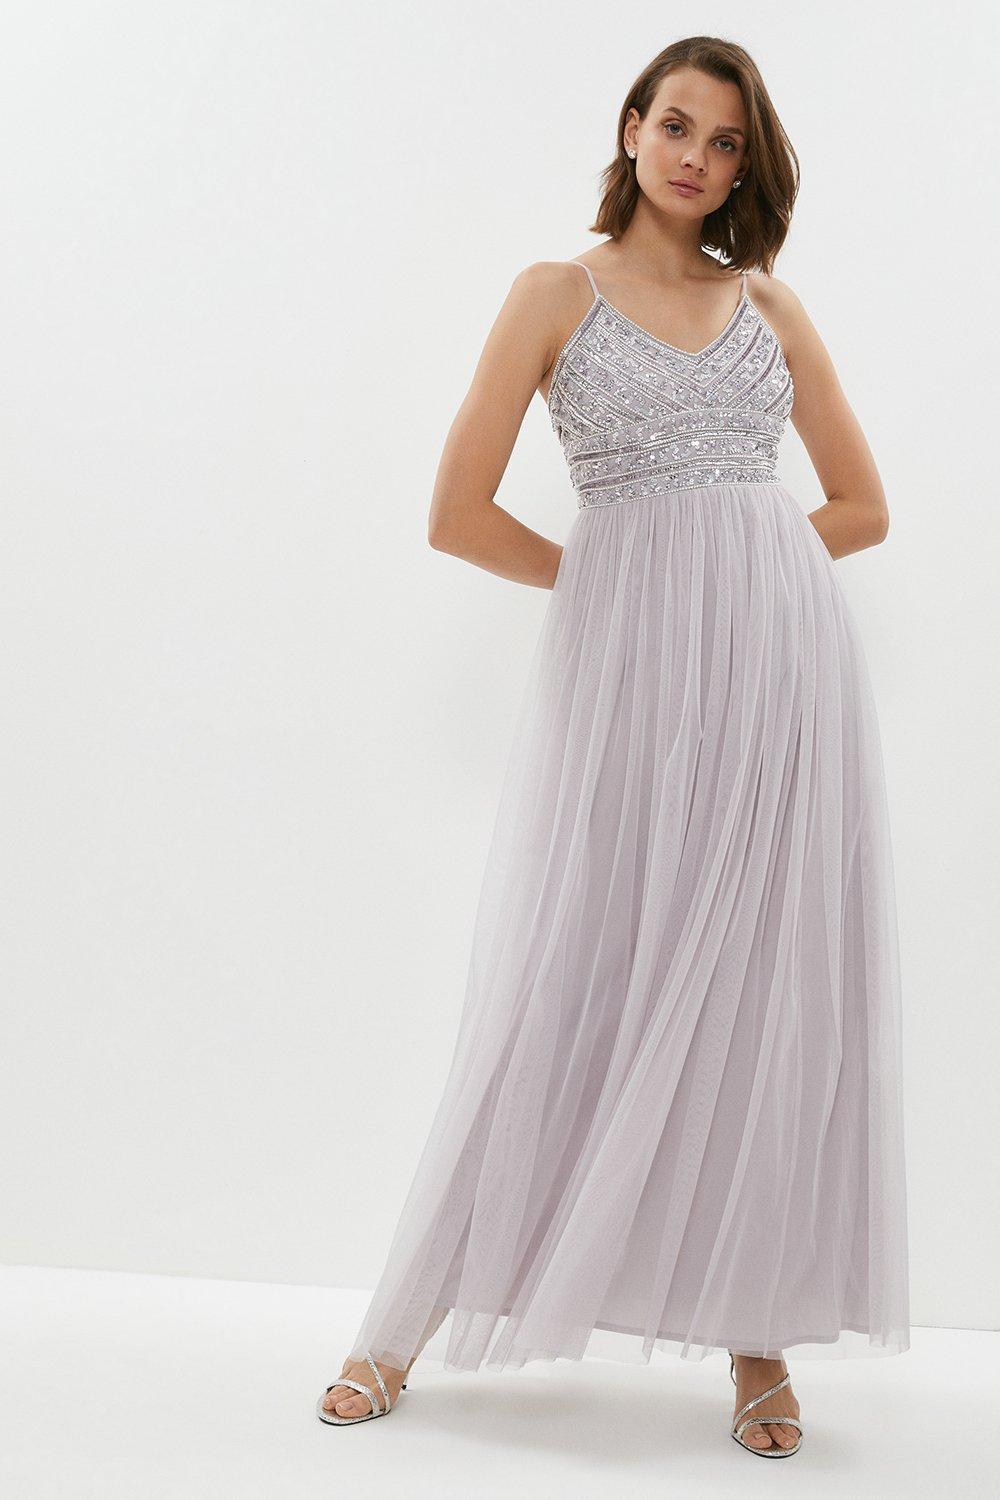 Dresses, Linear Embellished Tulle Cami Maxi Dress